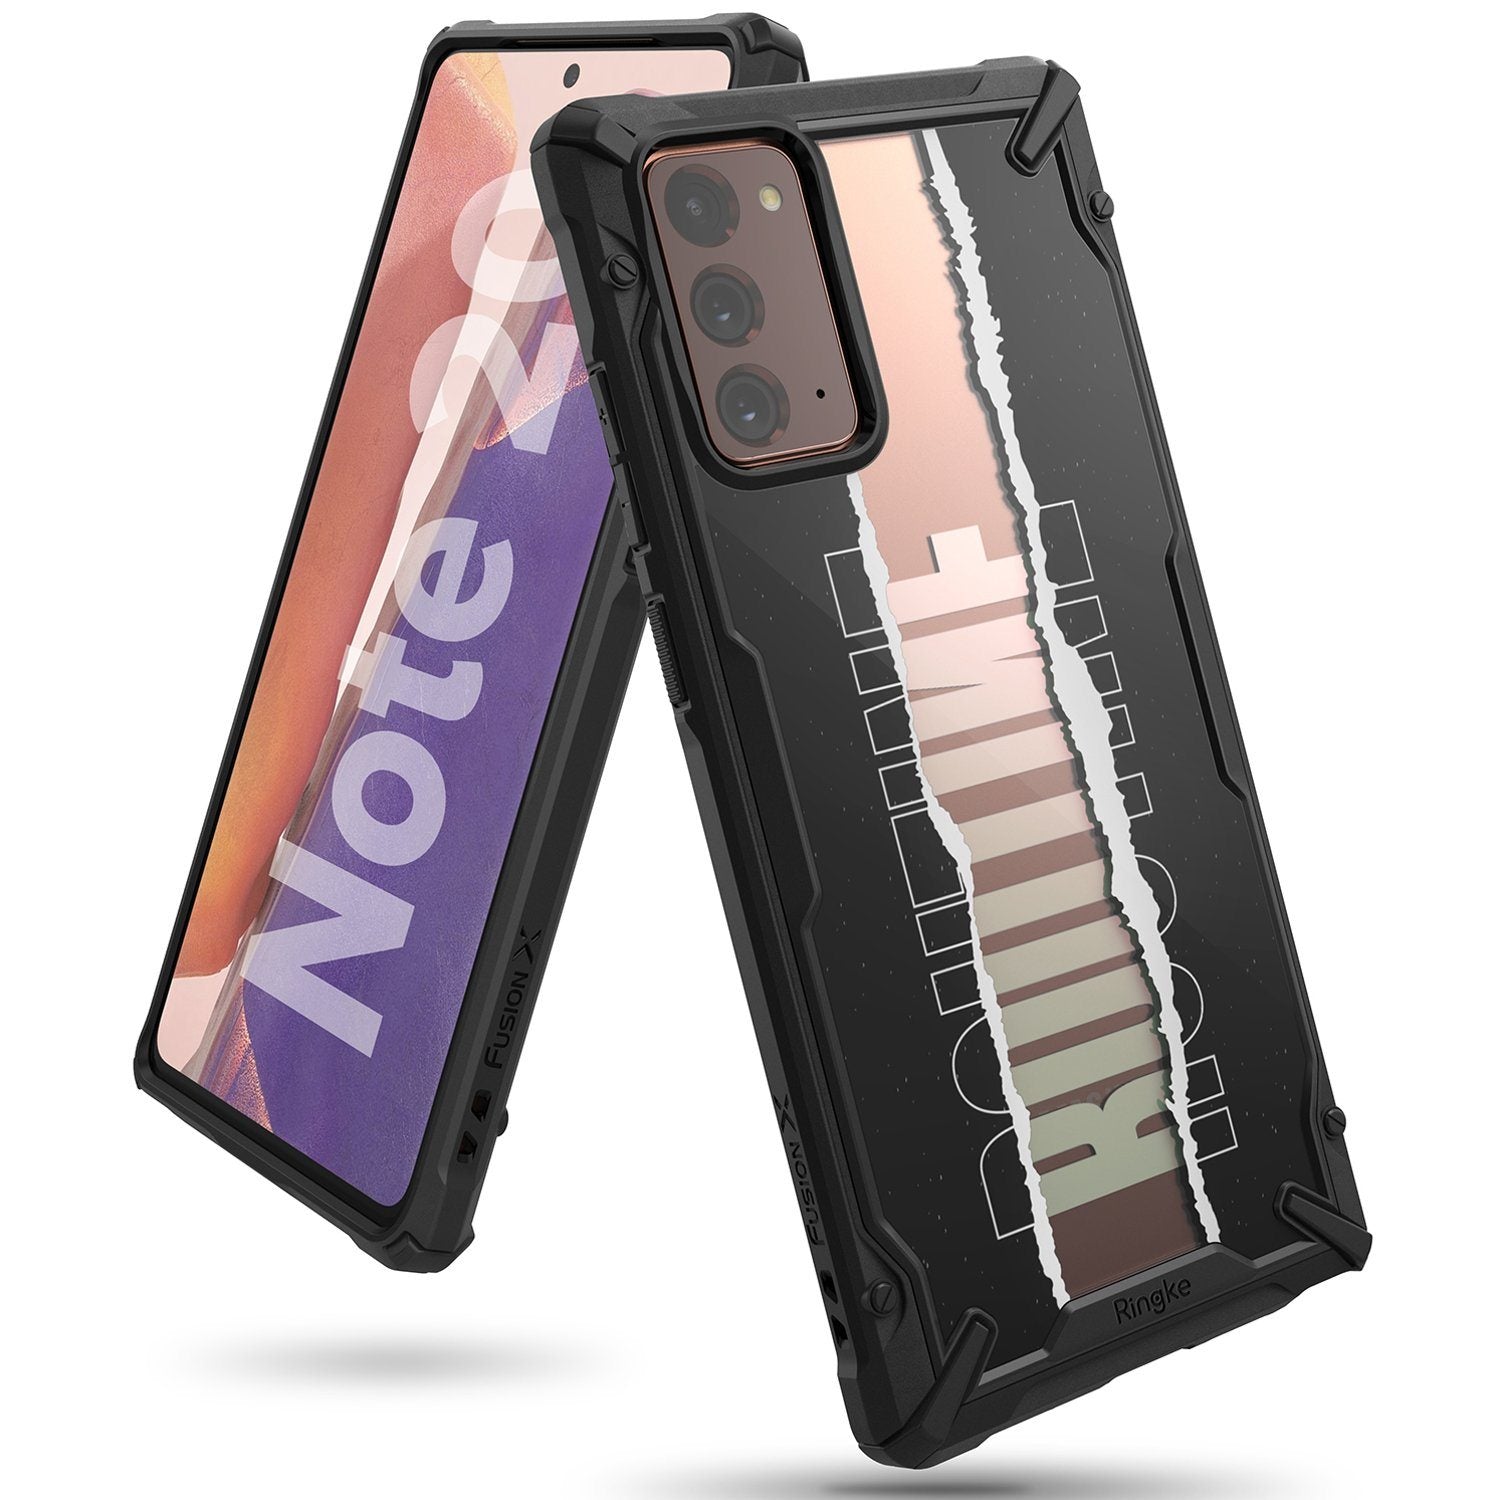 Ringke Fusion X Design Case for Samsung Galaxy Note 20, Rountine Default Ringke 